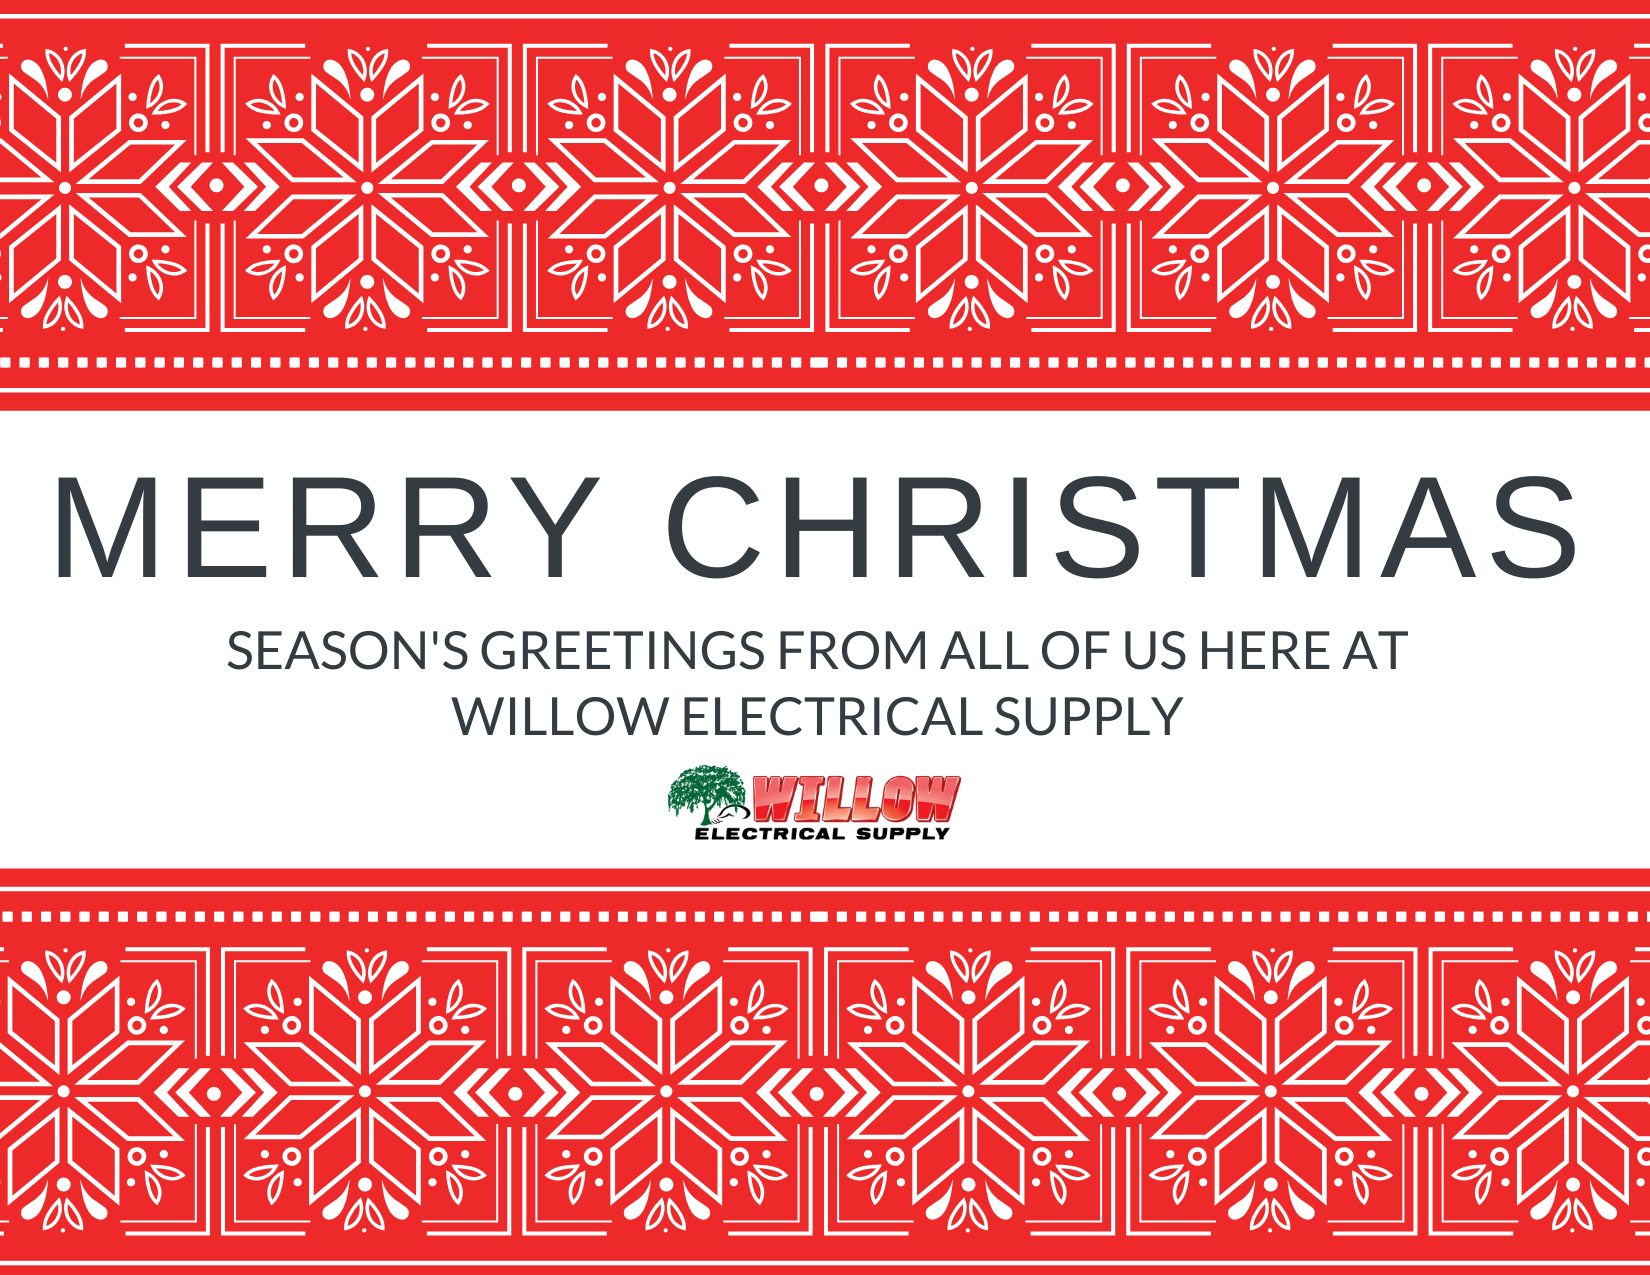 Merry Christmas 2020 from Willow Electrical Supply